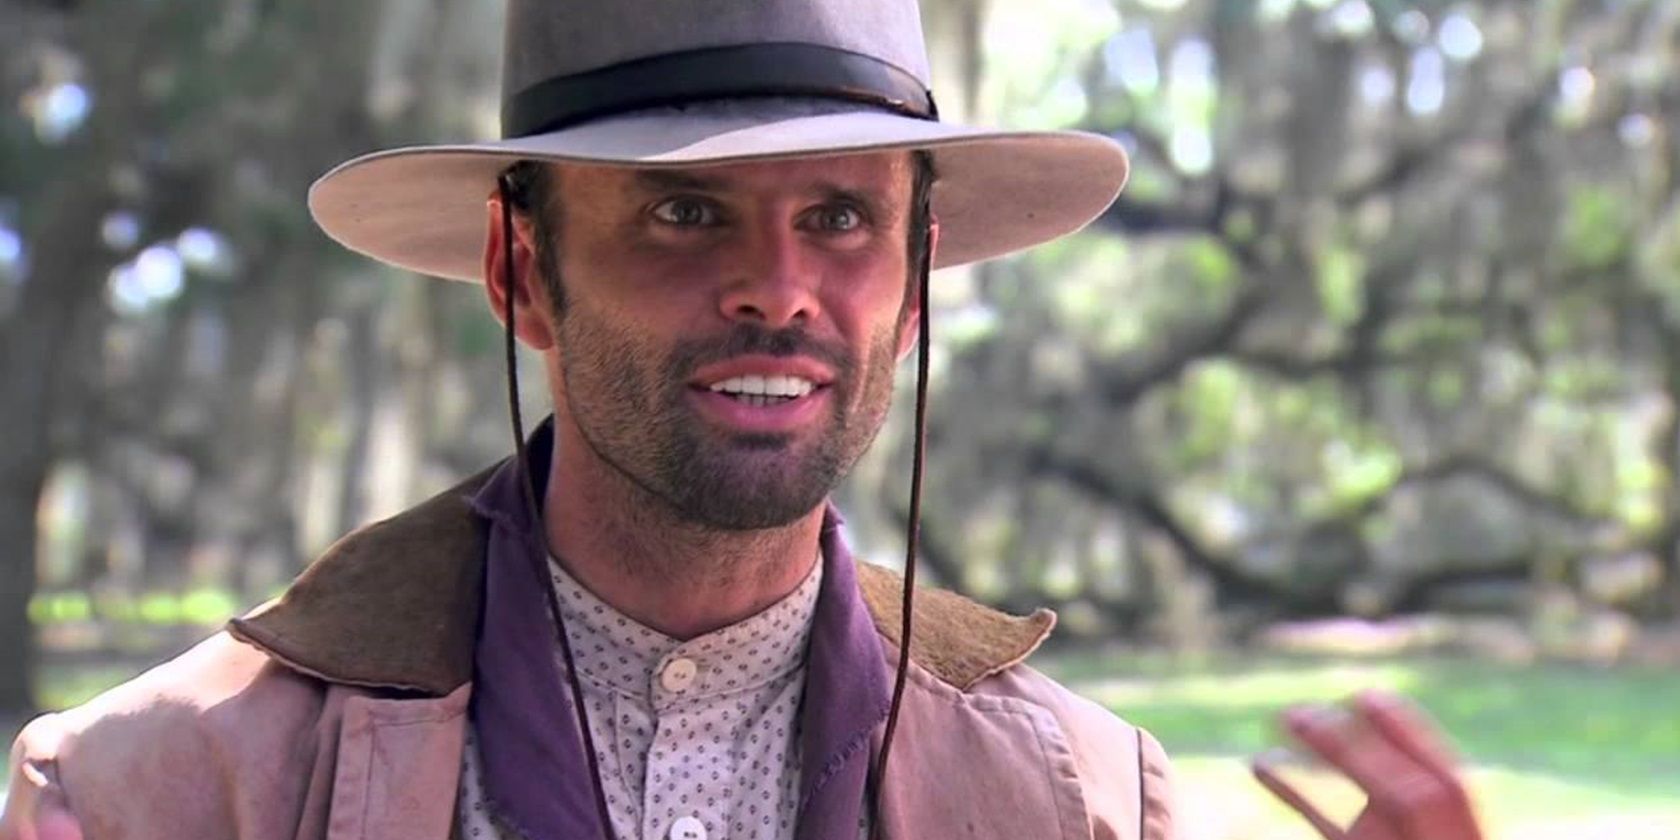 Billy Crash wearing a hat in Django Unchained